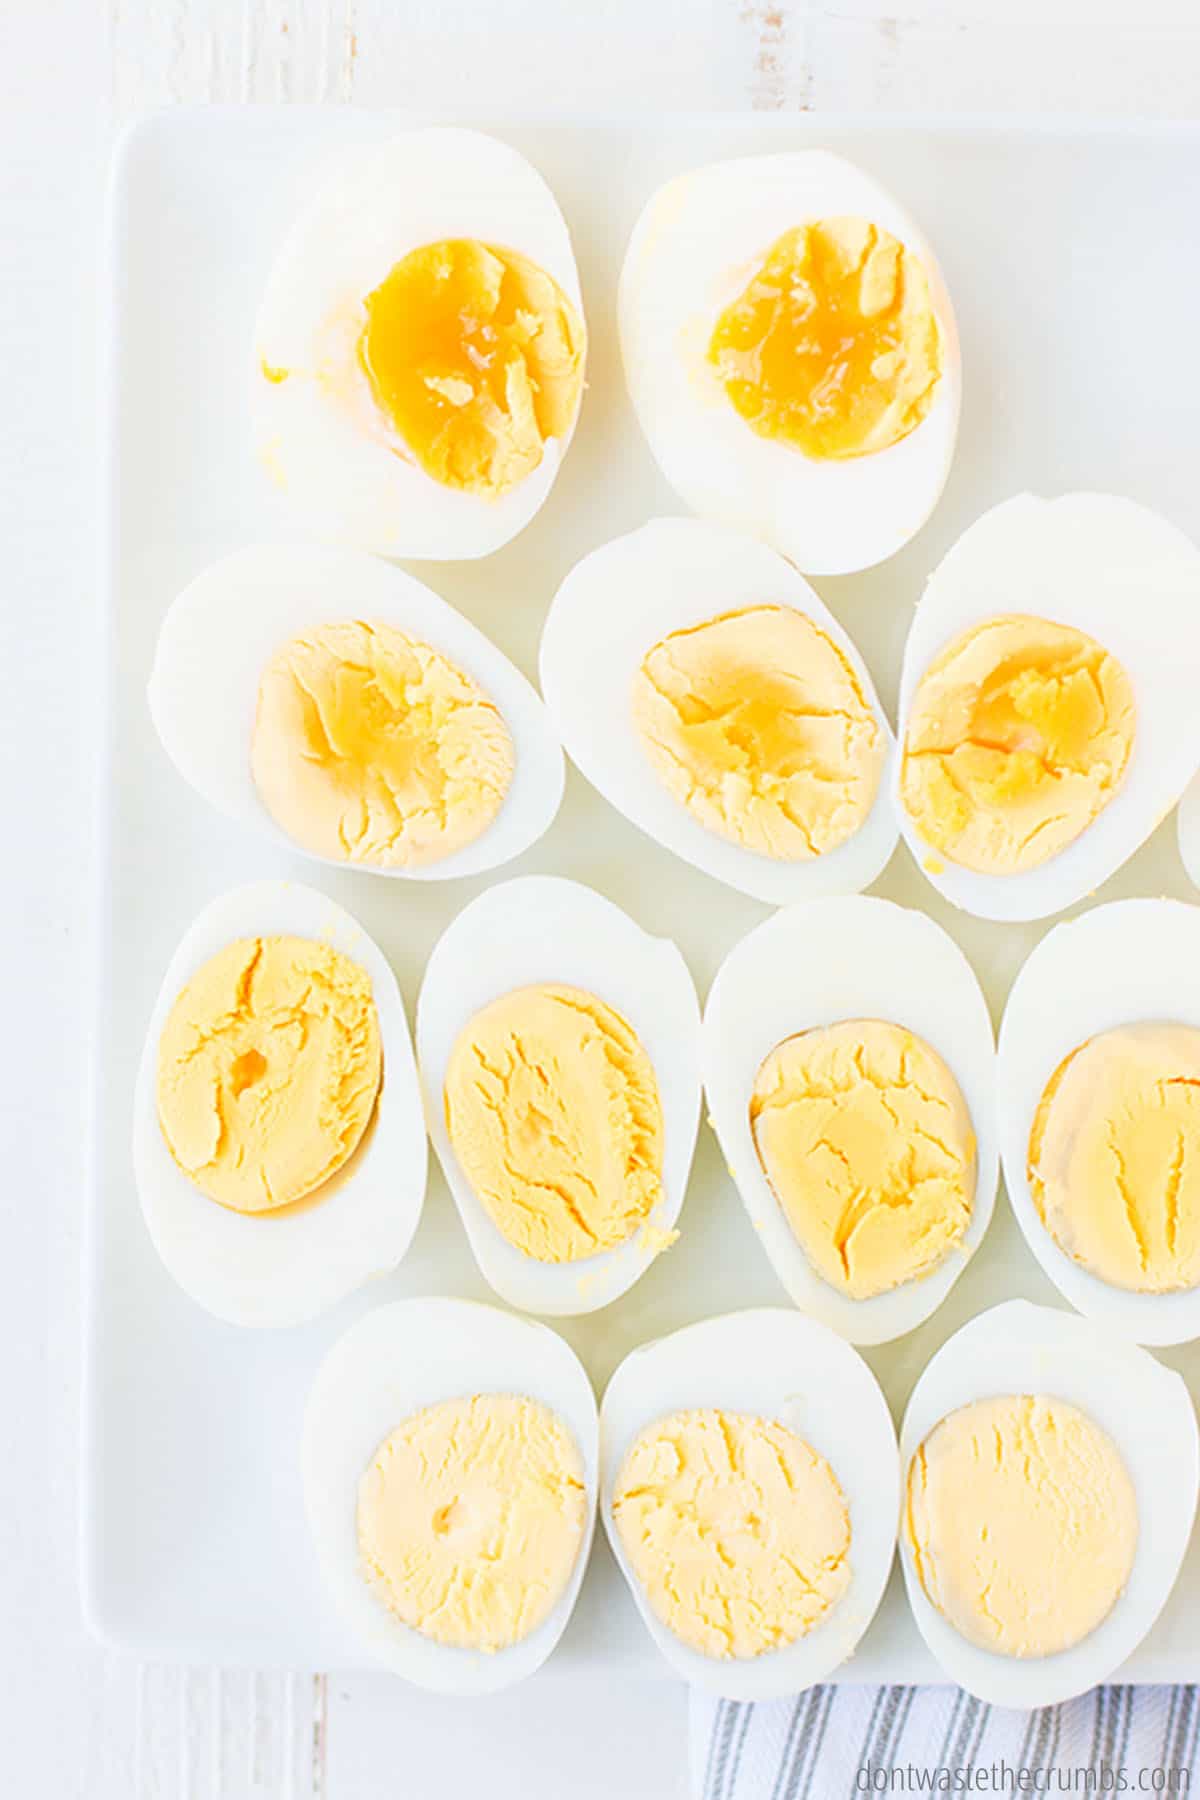 Boiled eggs, ranging from runny, soft-boiled eggs, to fully hard-boiled eggs, are displayed on a white tray.